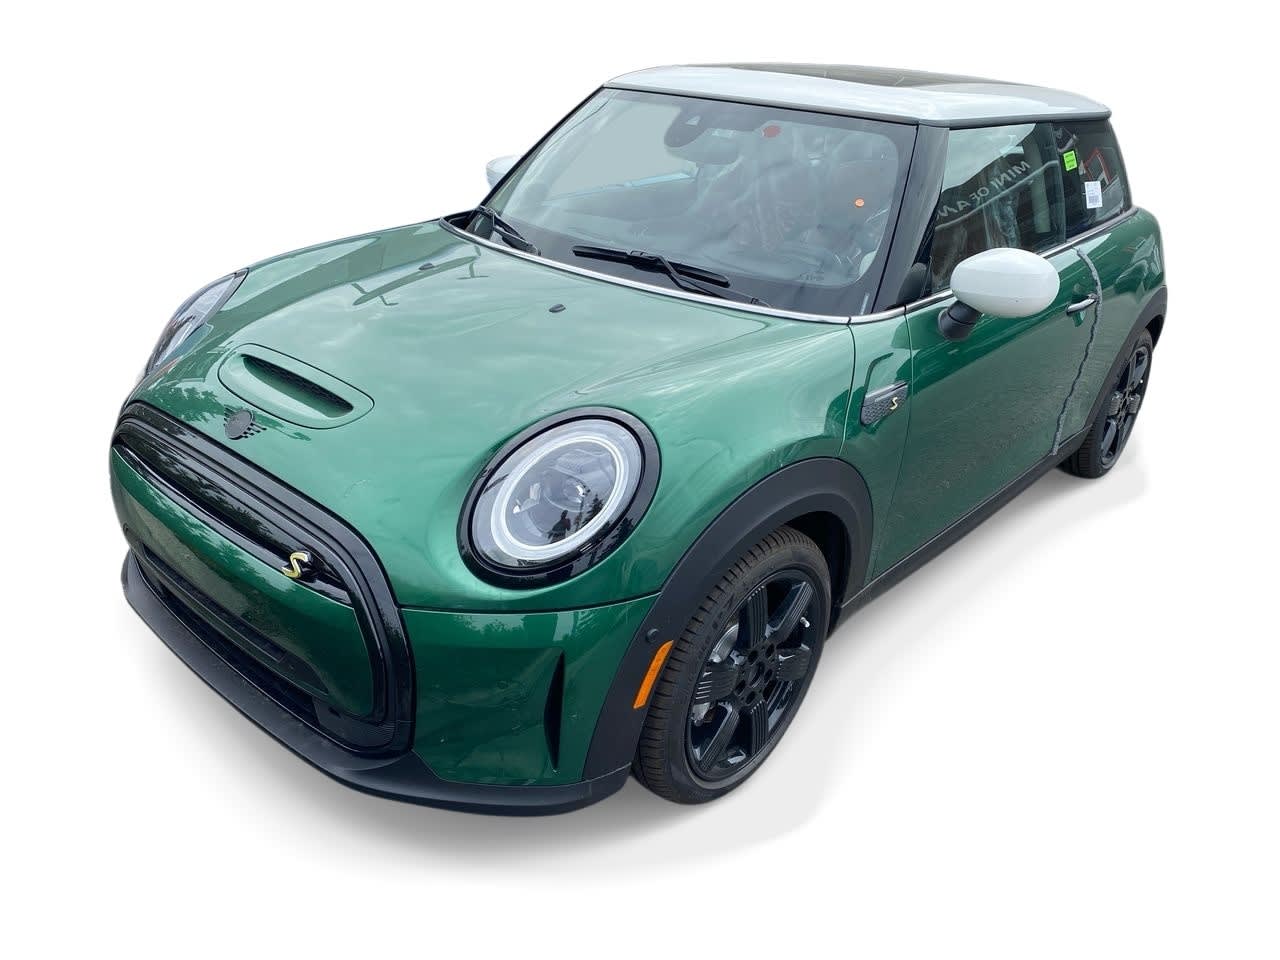 New 2024 MINI Hardtop 2 Door For Sale at MINI of Anchorage | VIN